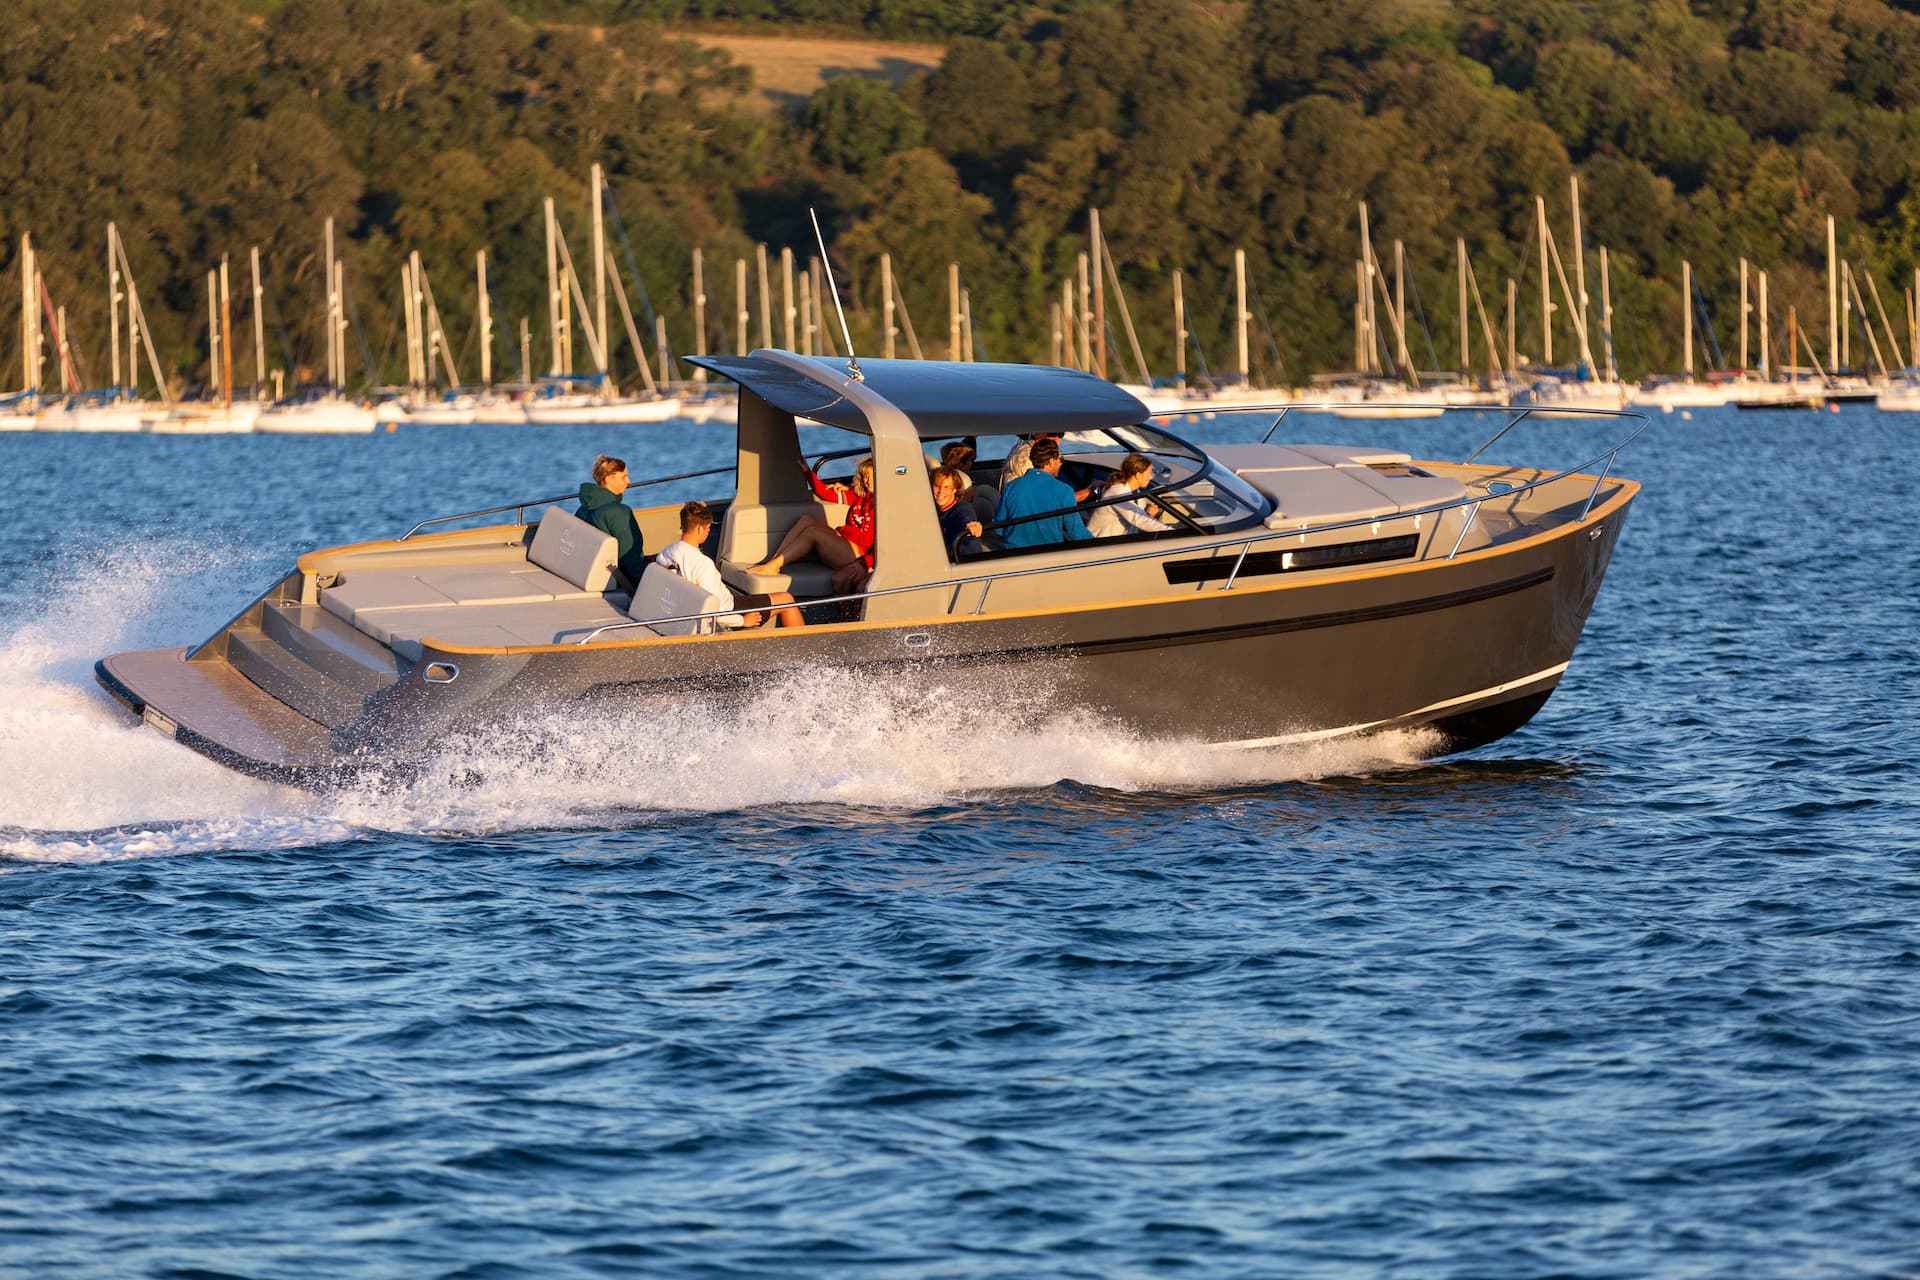 The-Duchy-Sport-the-ultimate-fun-watersports-boat.